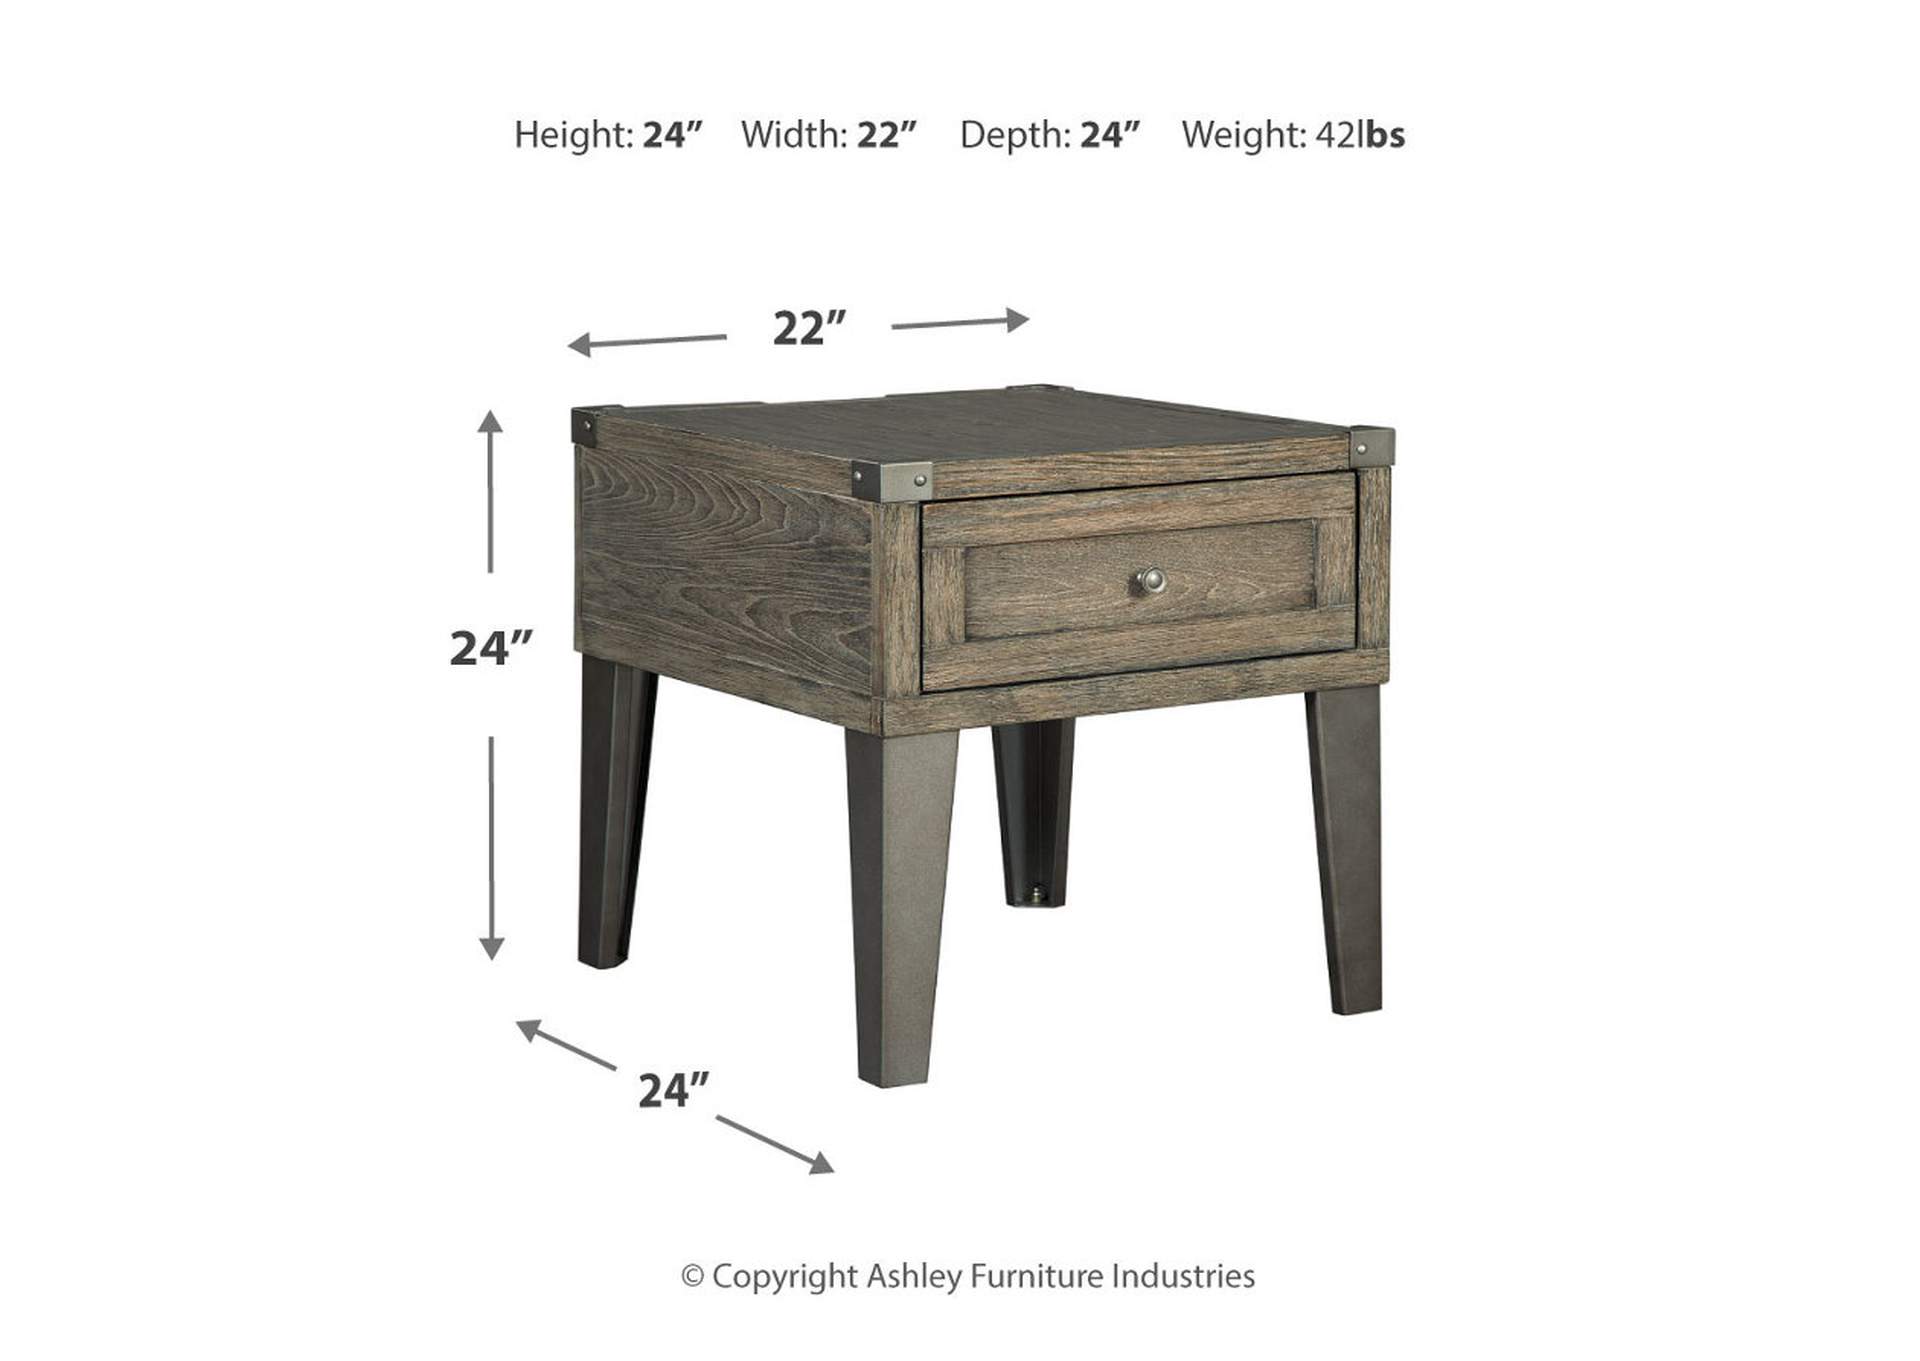 Chazney End Table,Signature Design By Ashley